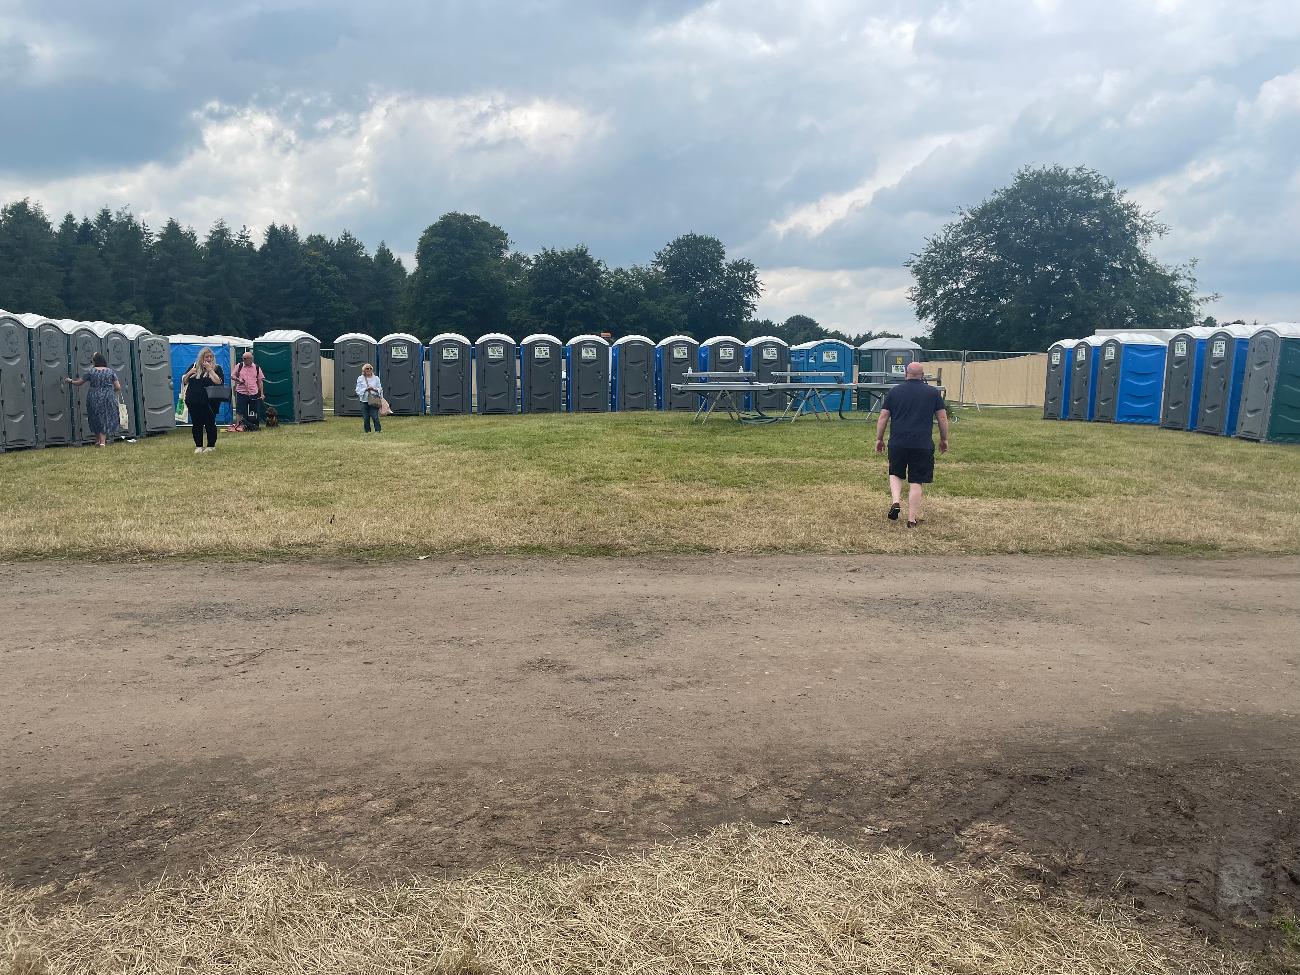 Gallery | Portable Toilet Loo Hire Rental Company in North West uk and Manchester gallery image 15